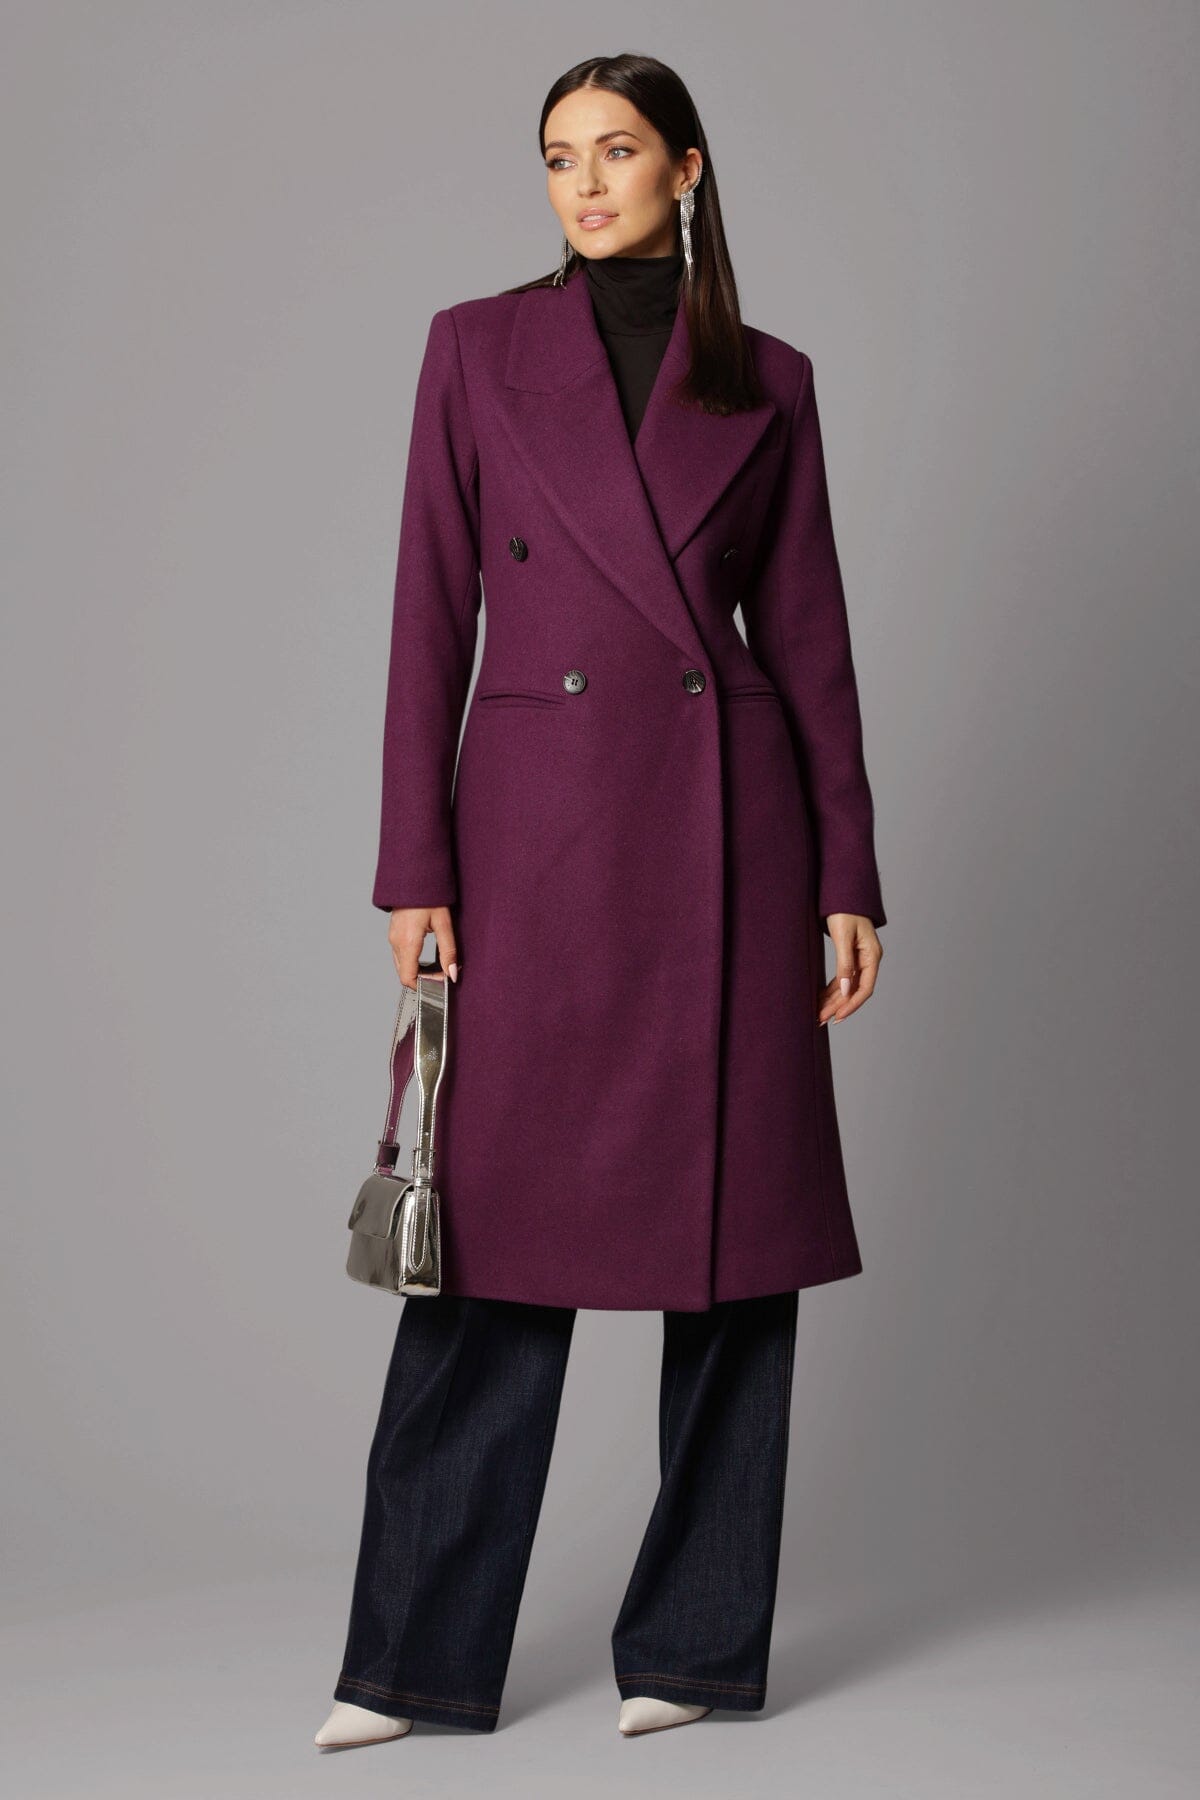 Aubergine purple tailored double-breasted long coat by Avec Les Filles Coats & Jackets